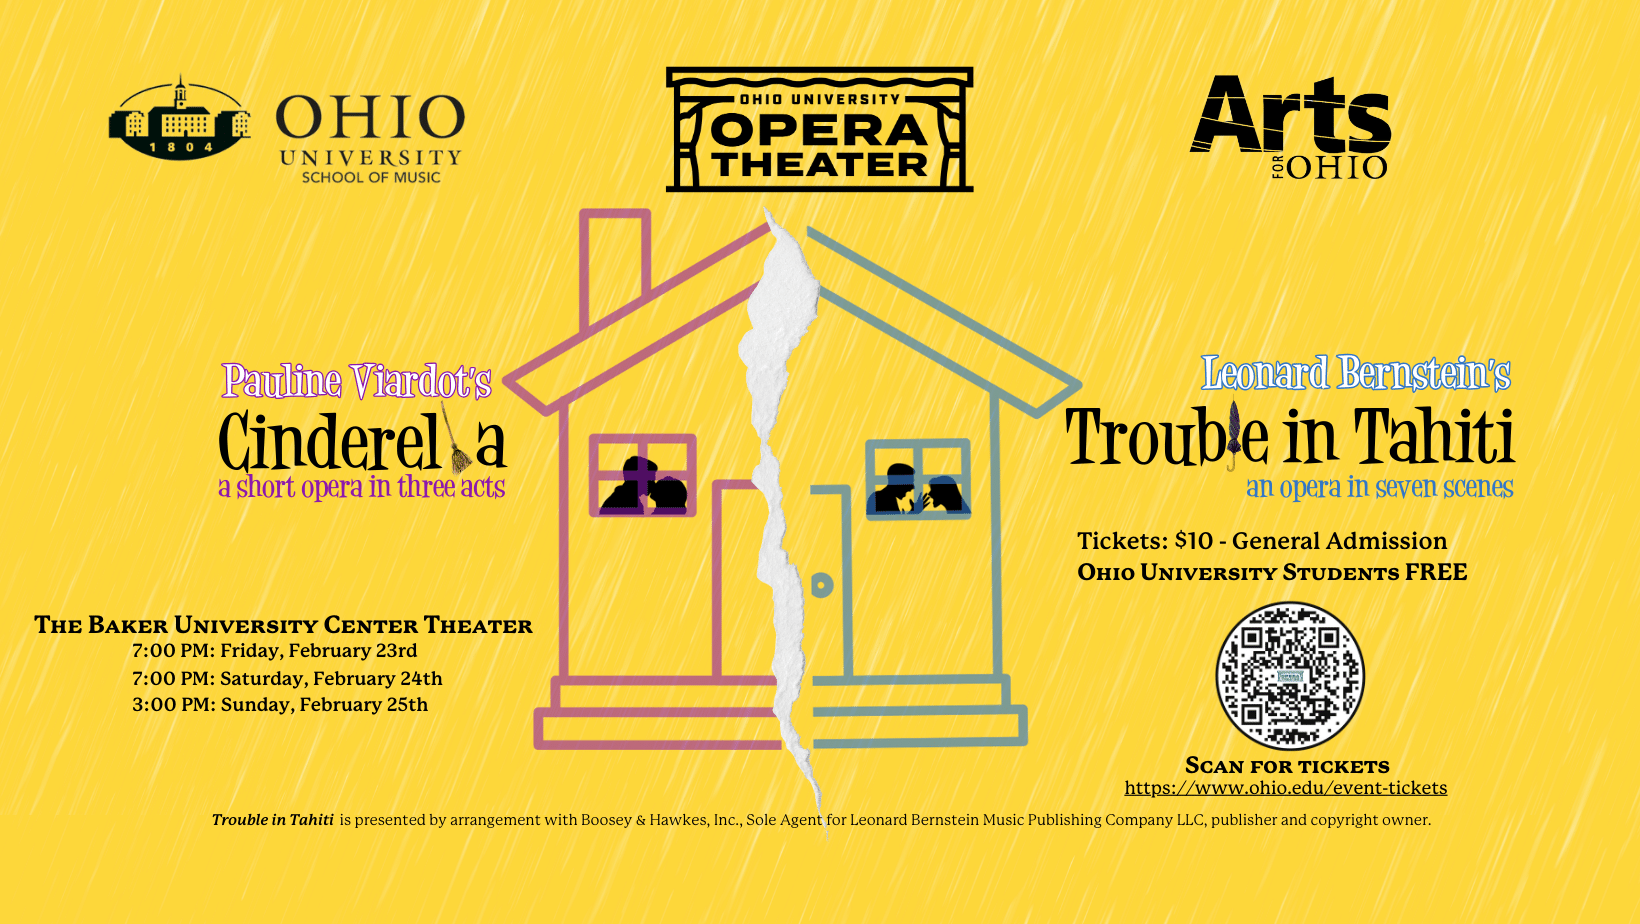 Yellow background with Ohio University School of Music logo in top right corner, Ohio University Opera Theater Logo top center, and Arts for OHIO logo in upper right corner. Pauline Viardot's Cinderella and Leonard Bernstein's Trouble in Tahiti; divided house pink on left and blue on right. Friday, February 23 at 7:00pm; Saturday, February 24 at 7:00pm, and Sunday, February 25 at 3:00pm. $10 general admission; OHIO students are free. link to purchase tickets is ohio.edu/event-tickets